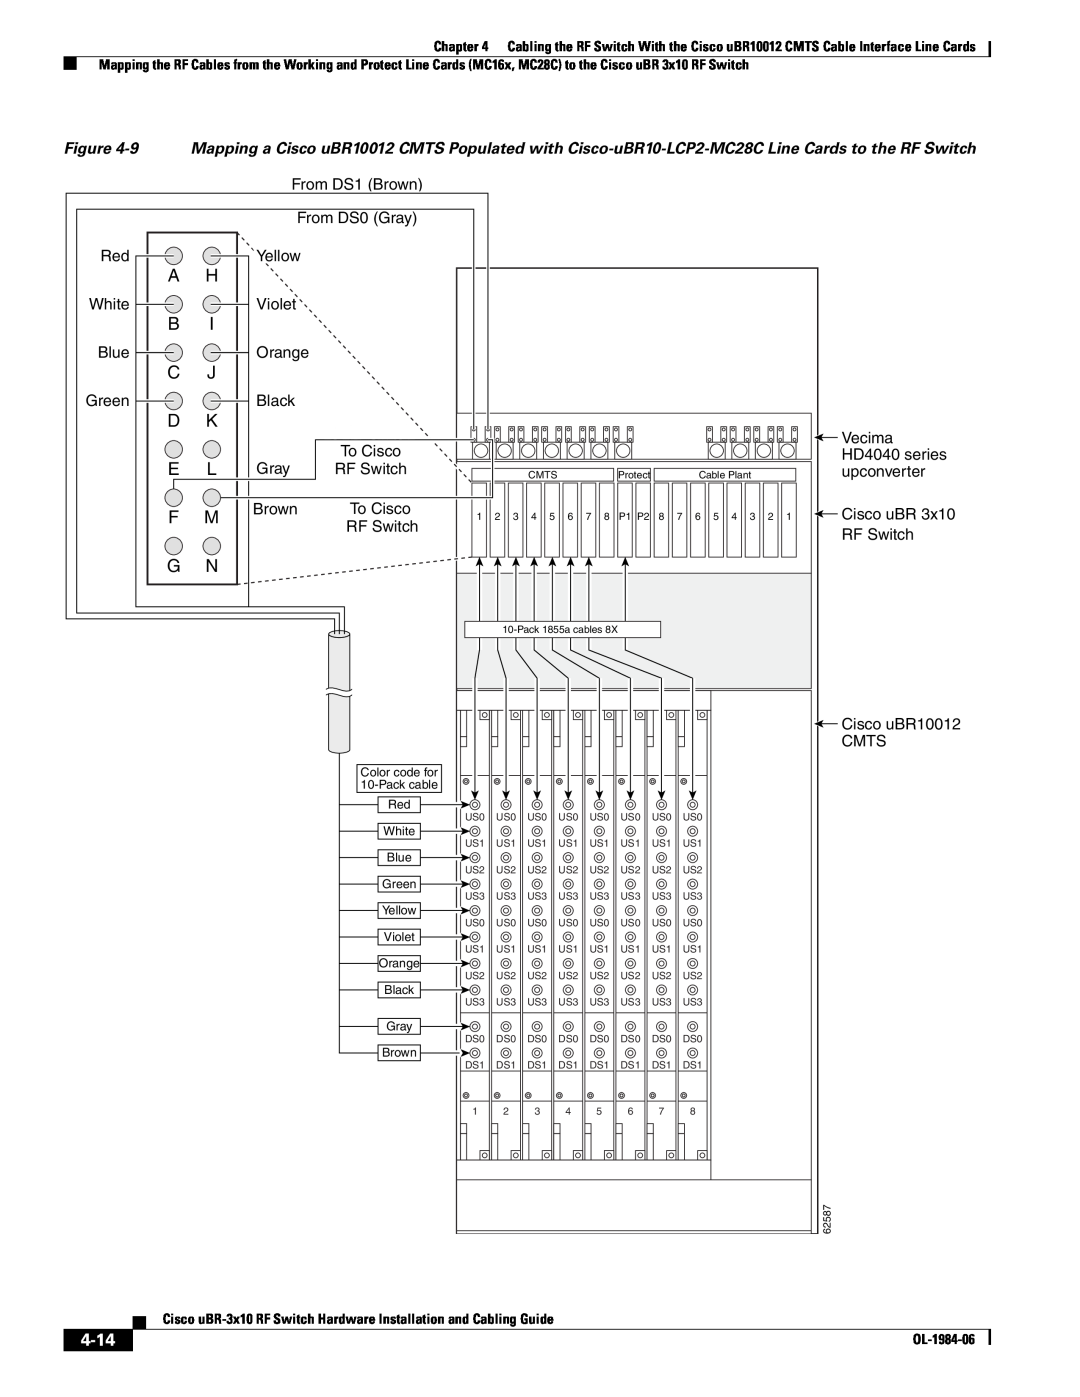 Cisco Systems UBR-3X10 manual 4-14, From DS1 Brown From DS0 Gray, To RF switch, TooCiscoRFwitch 